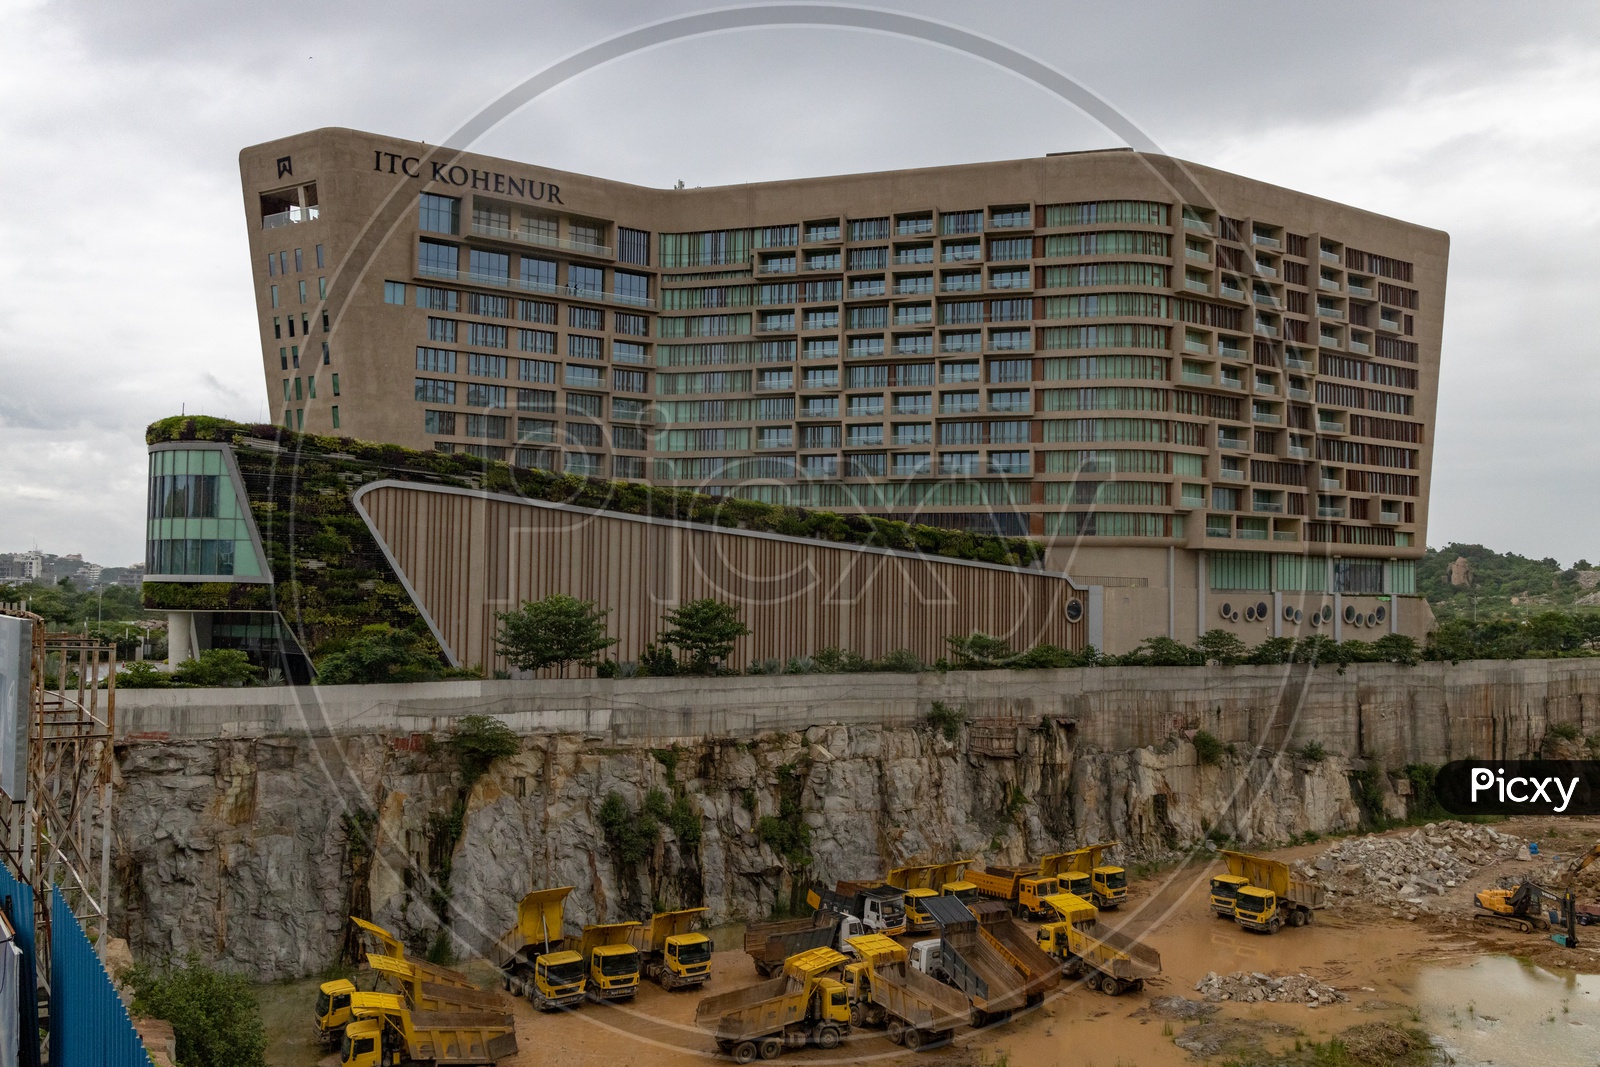 A View Of ITC Kohenur , A Luxury  Collections of Hotels in Hyderabad With Construction Trucks Or Trippers at Besides Construction Site